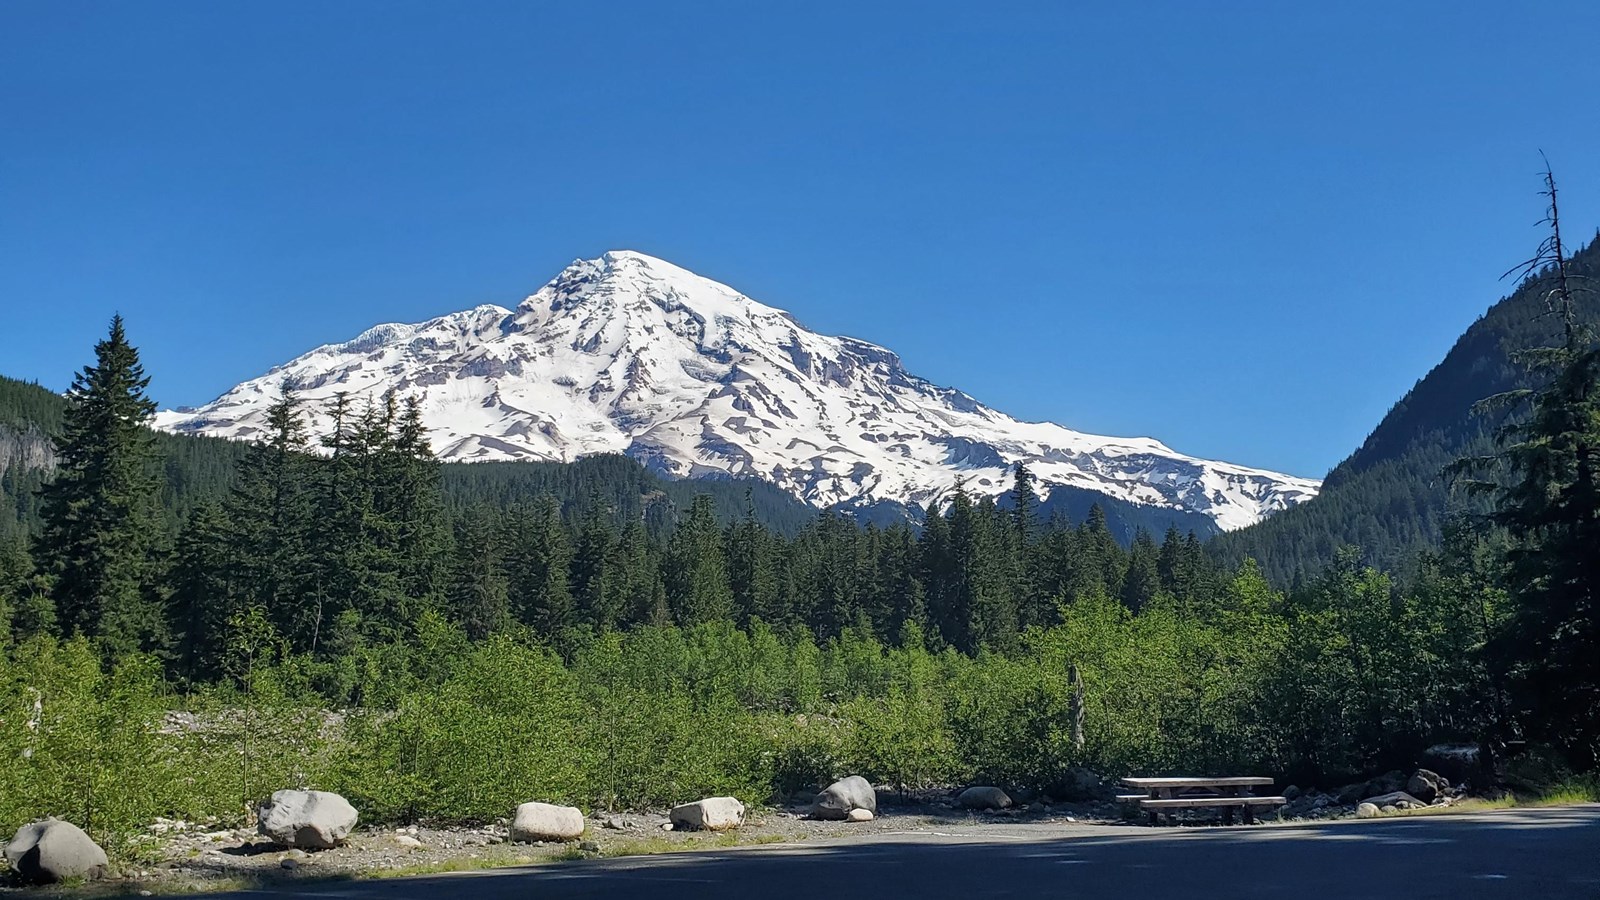 Mount Rainier in the distance with alder trees, large boulders, and a picnic table in the foreground